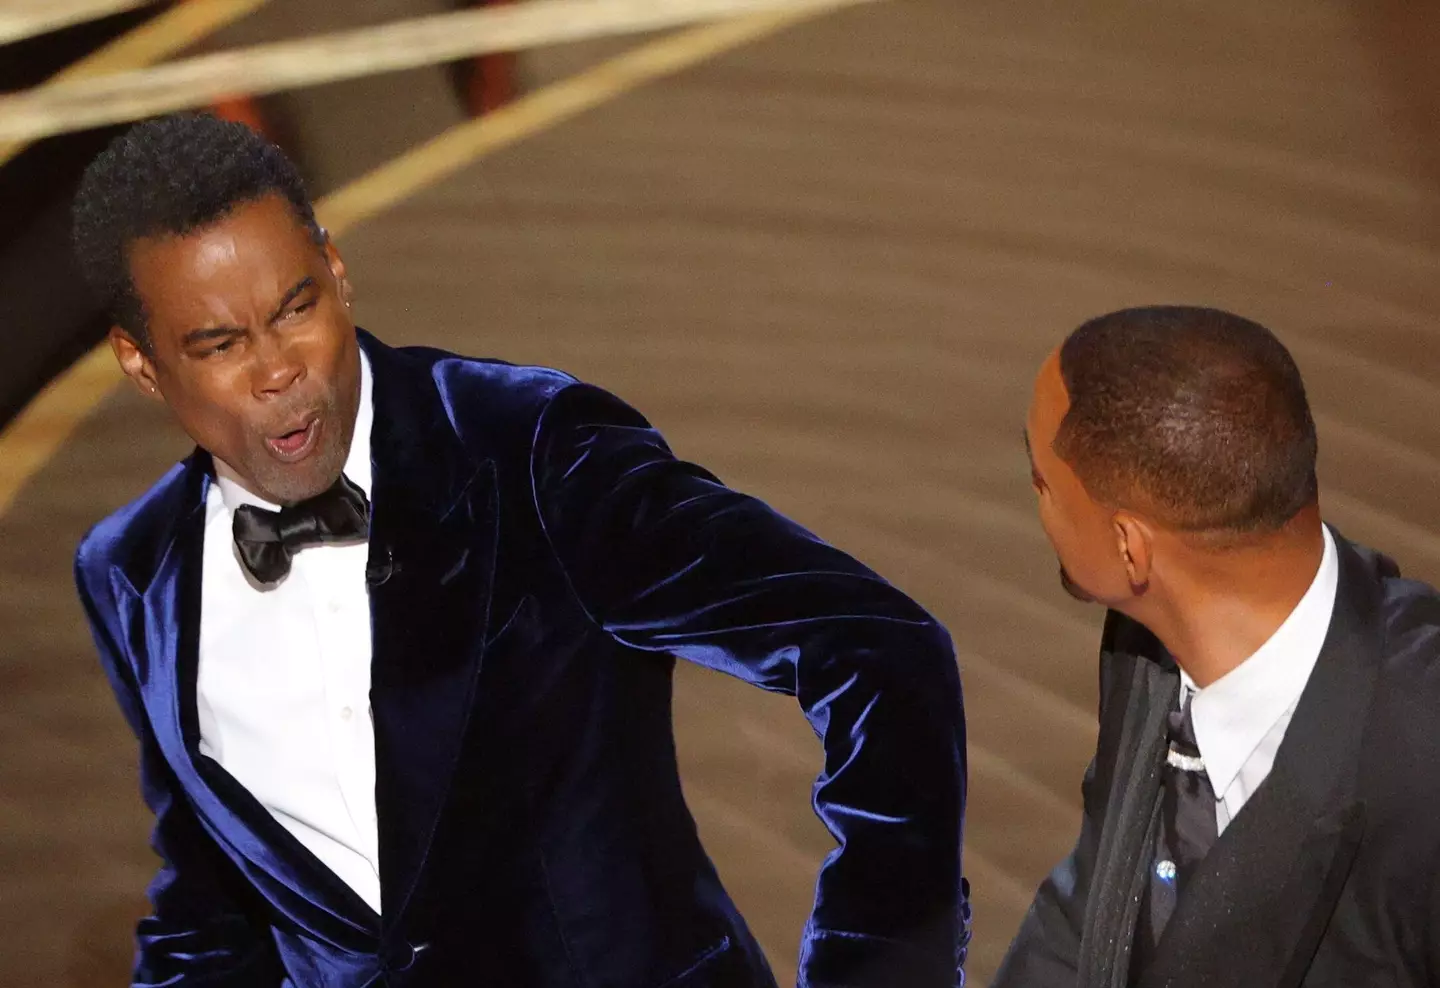 Chris Rock moments after he was slapped by Will Smith.